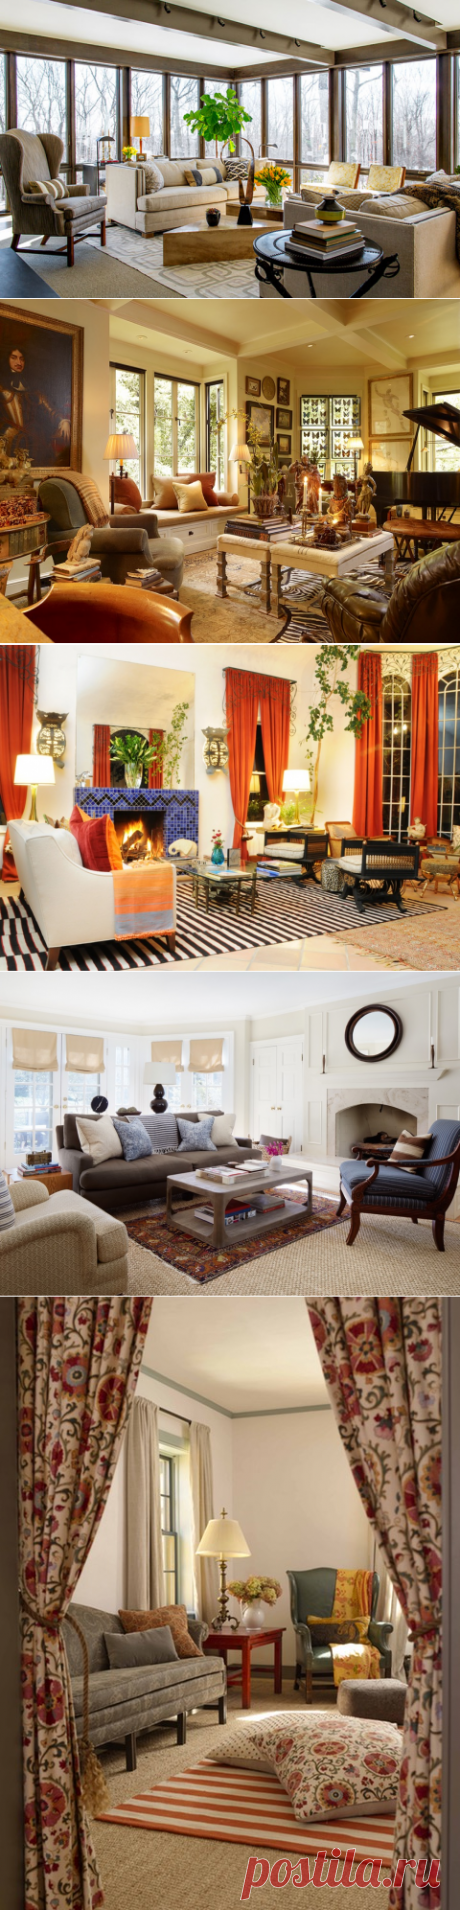 15 Rooms with Layered Rug Designs - Inspiration - Dering Hall